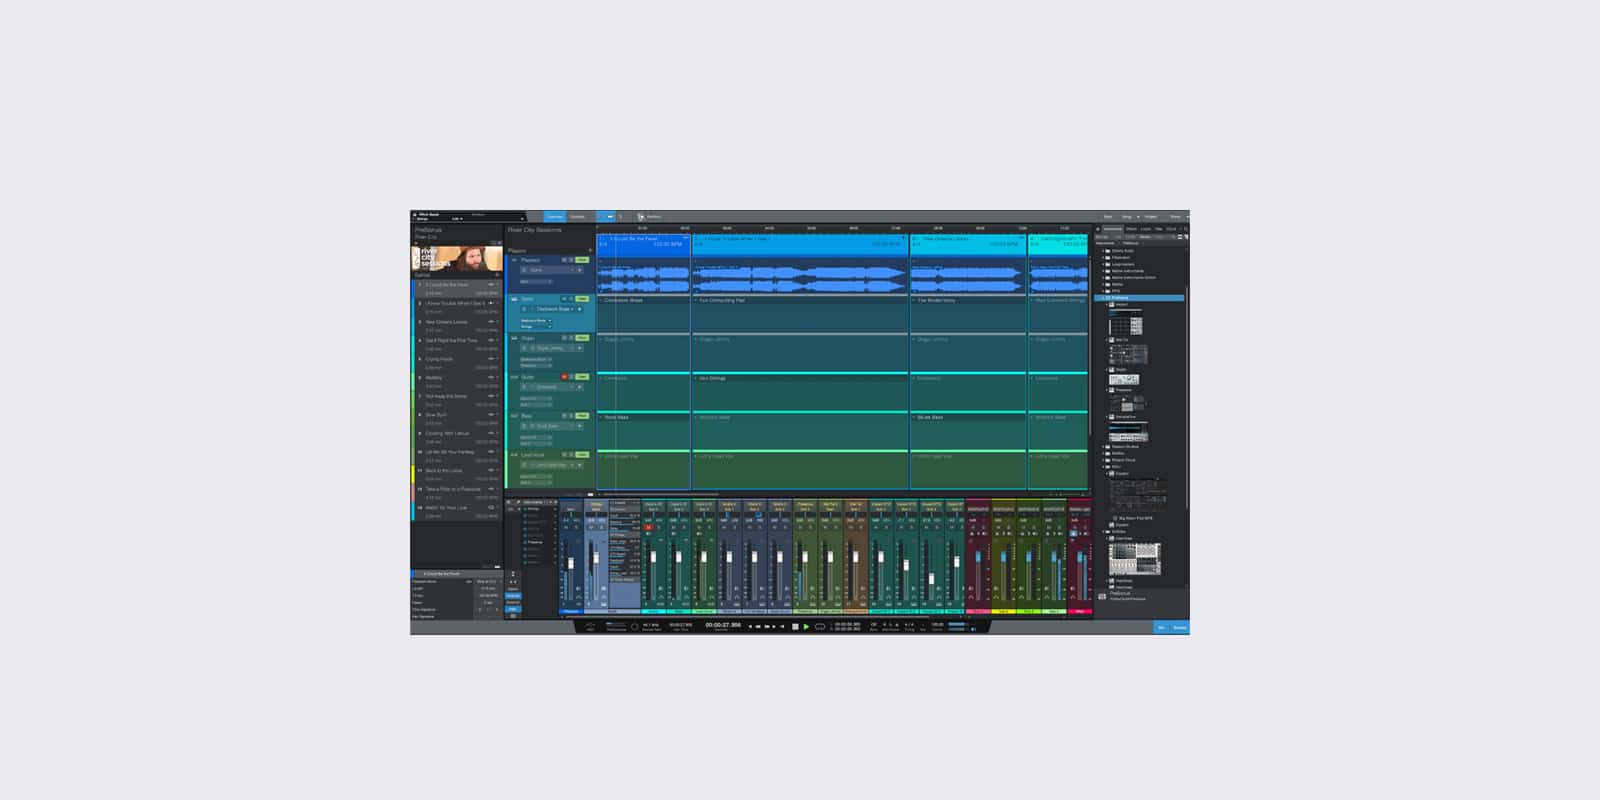 PreSonus Studio One 5 Delivers Live, Scoring Features, and Much More